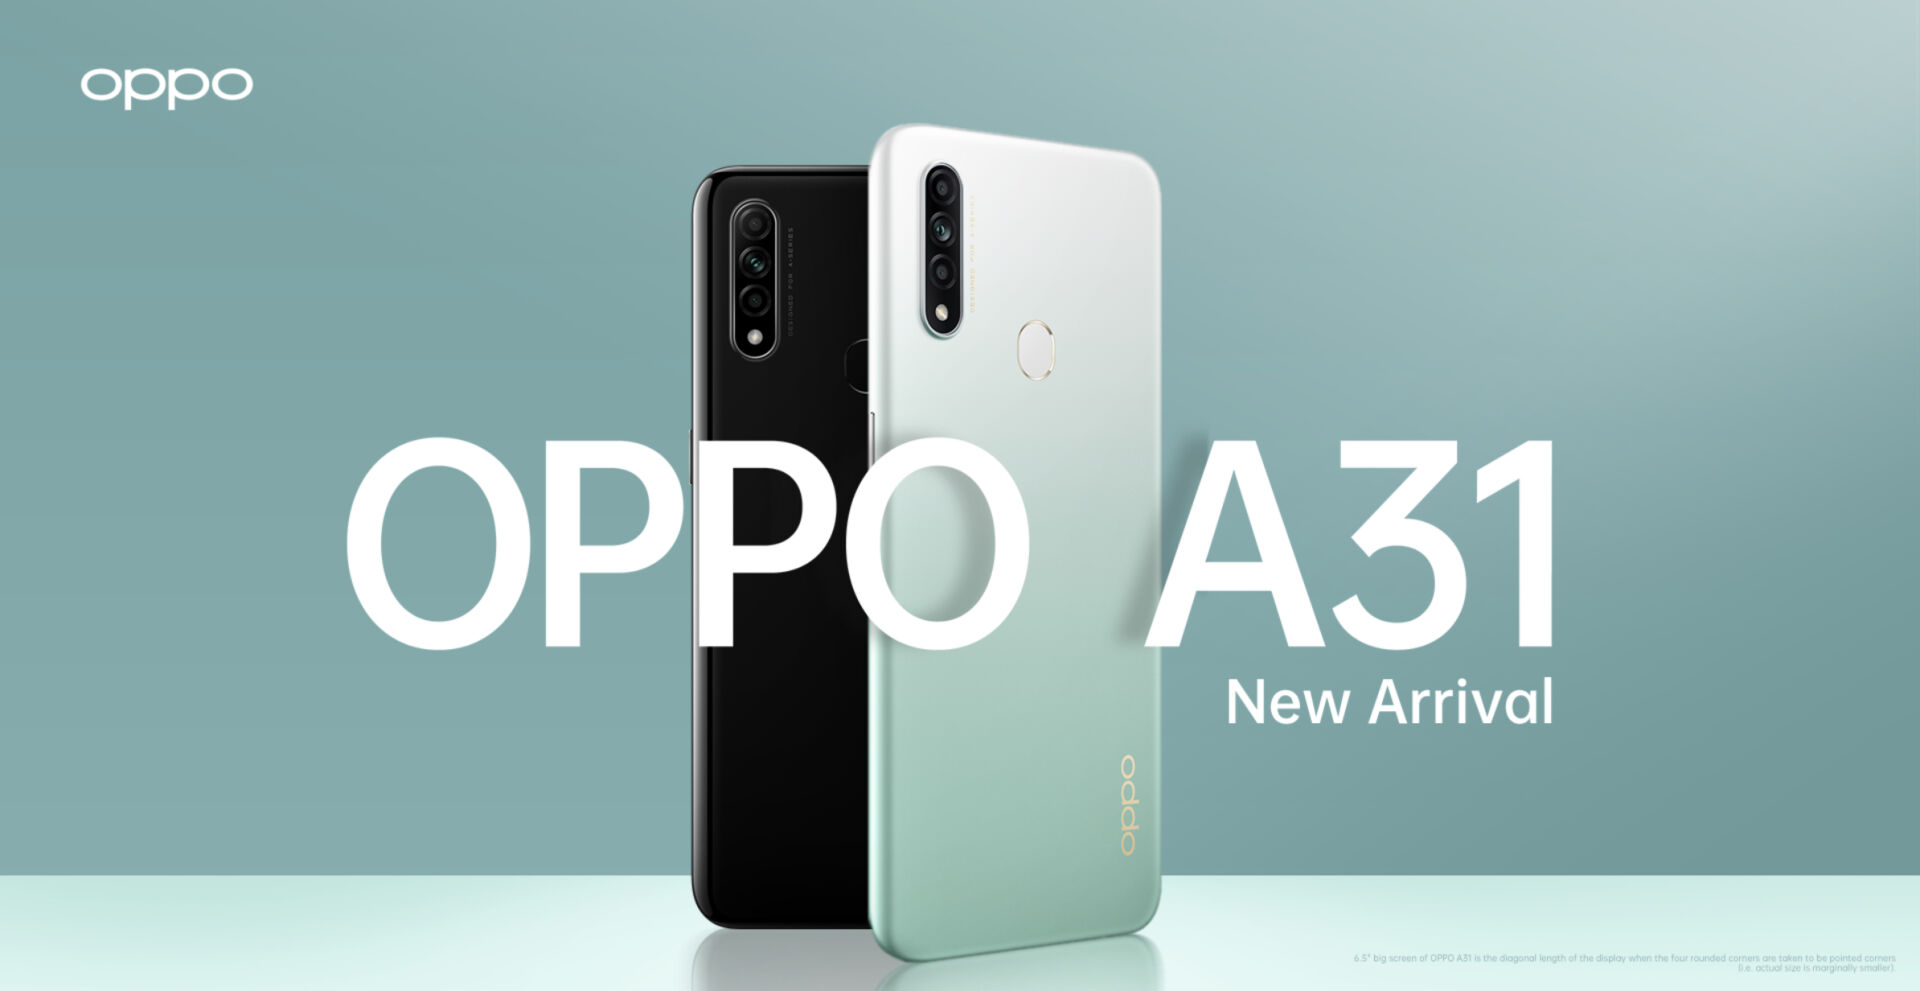 OPPO A31 Philippines: Specs, Price & Availability - Jam Online